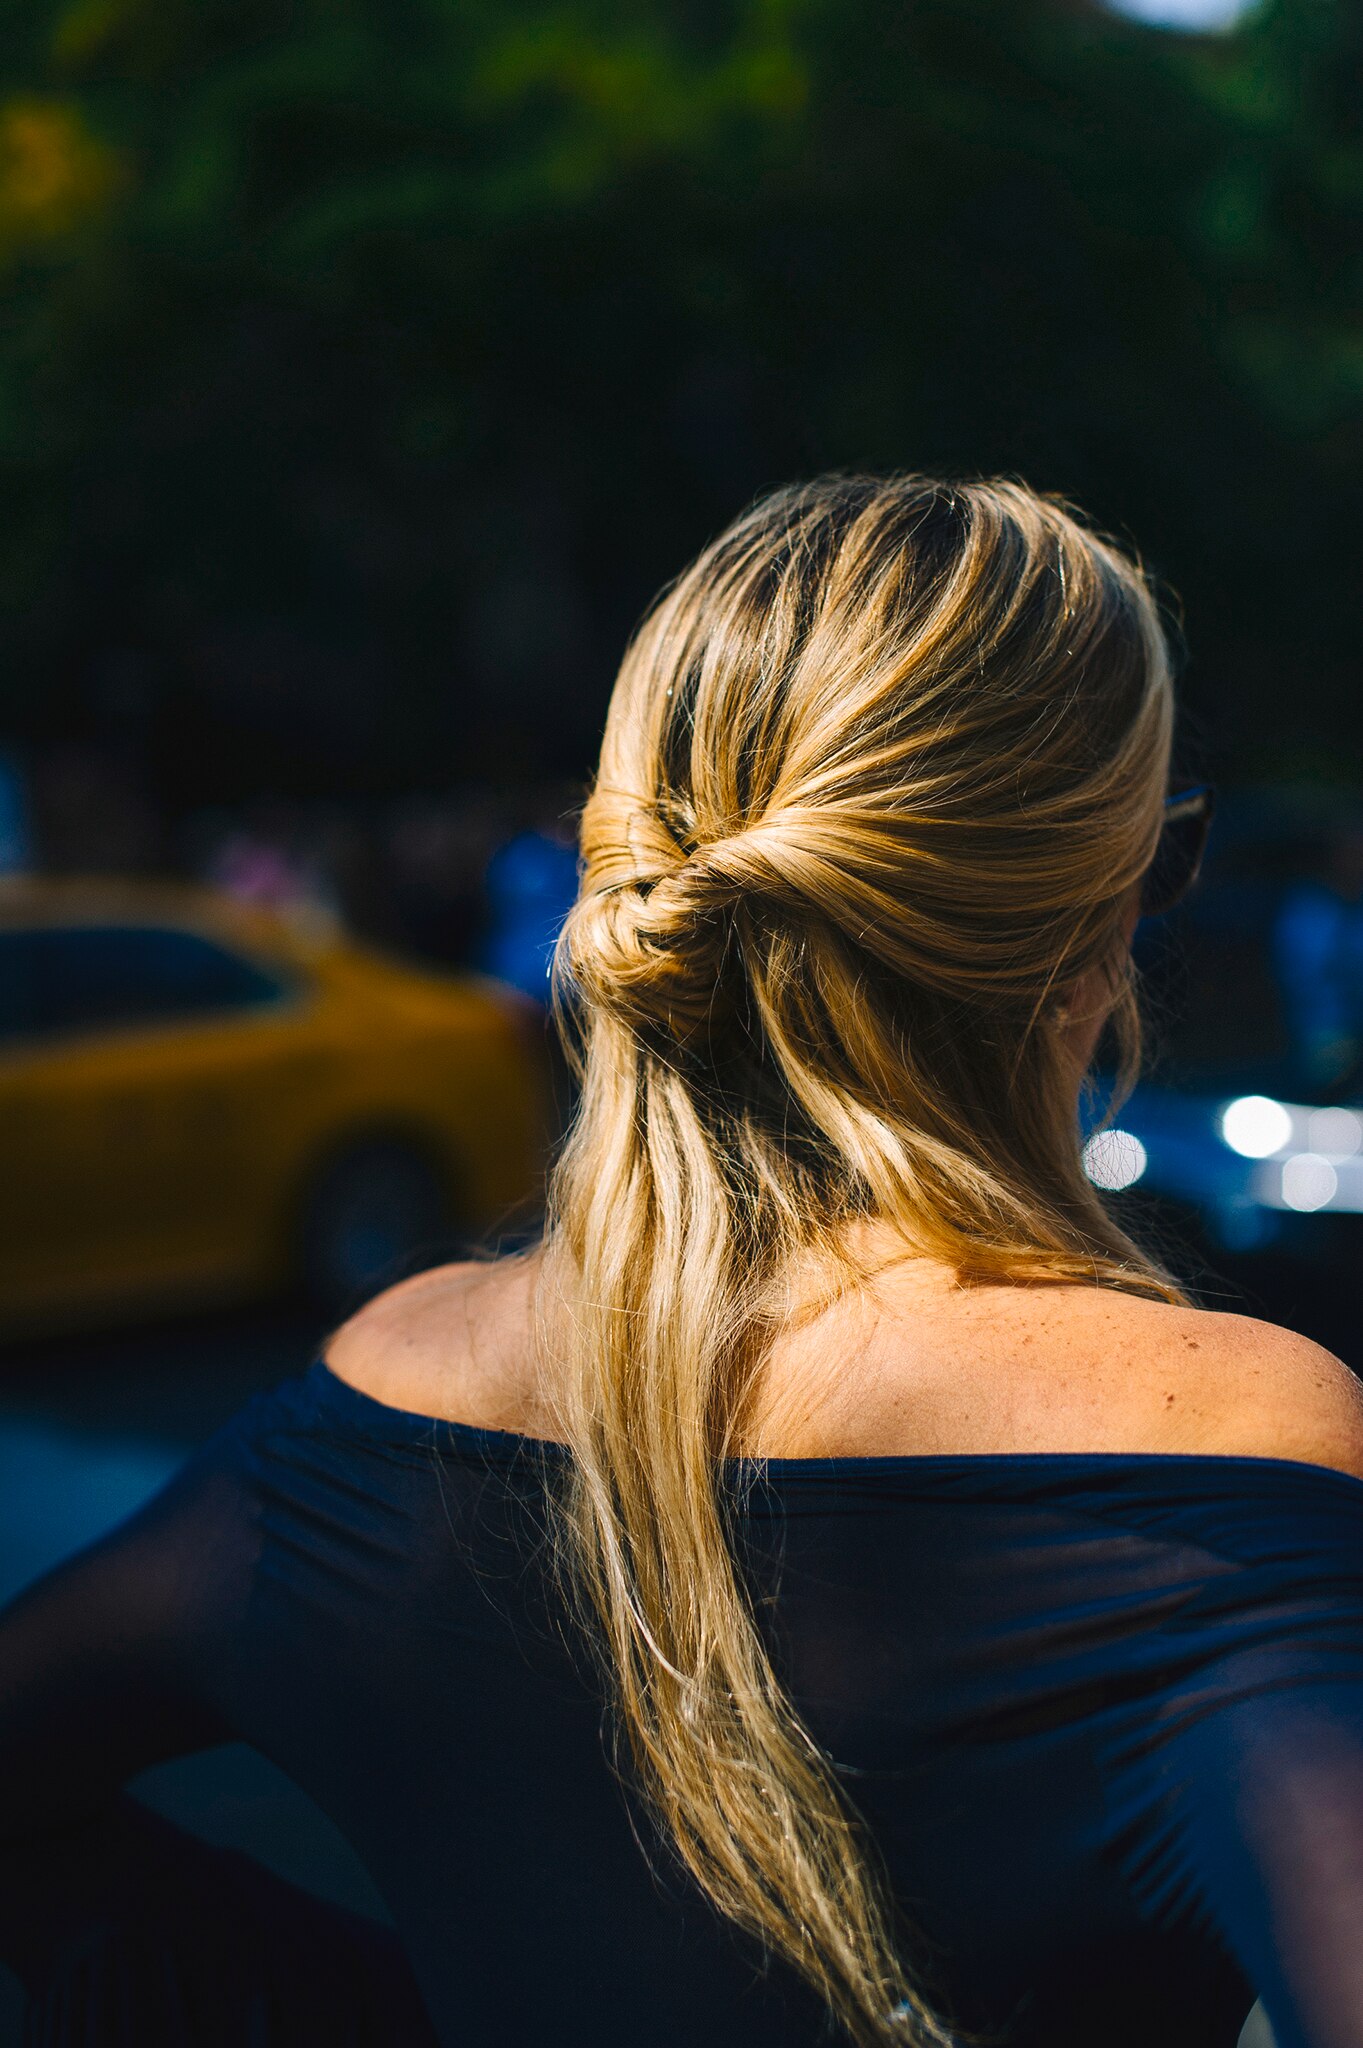 A blonde woman walking through the city, wearing a blue blouse with her hair in a messy bun